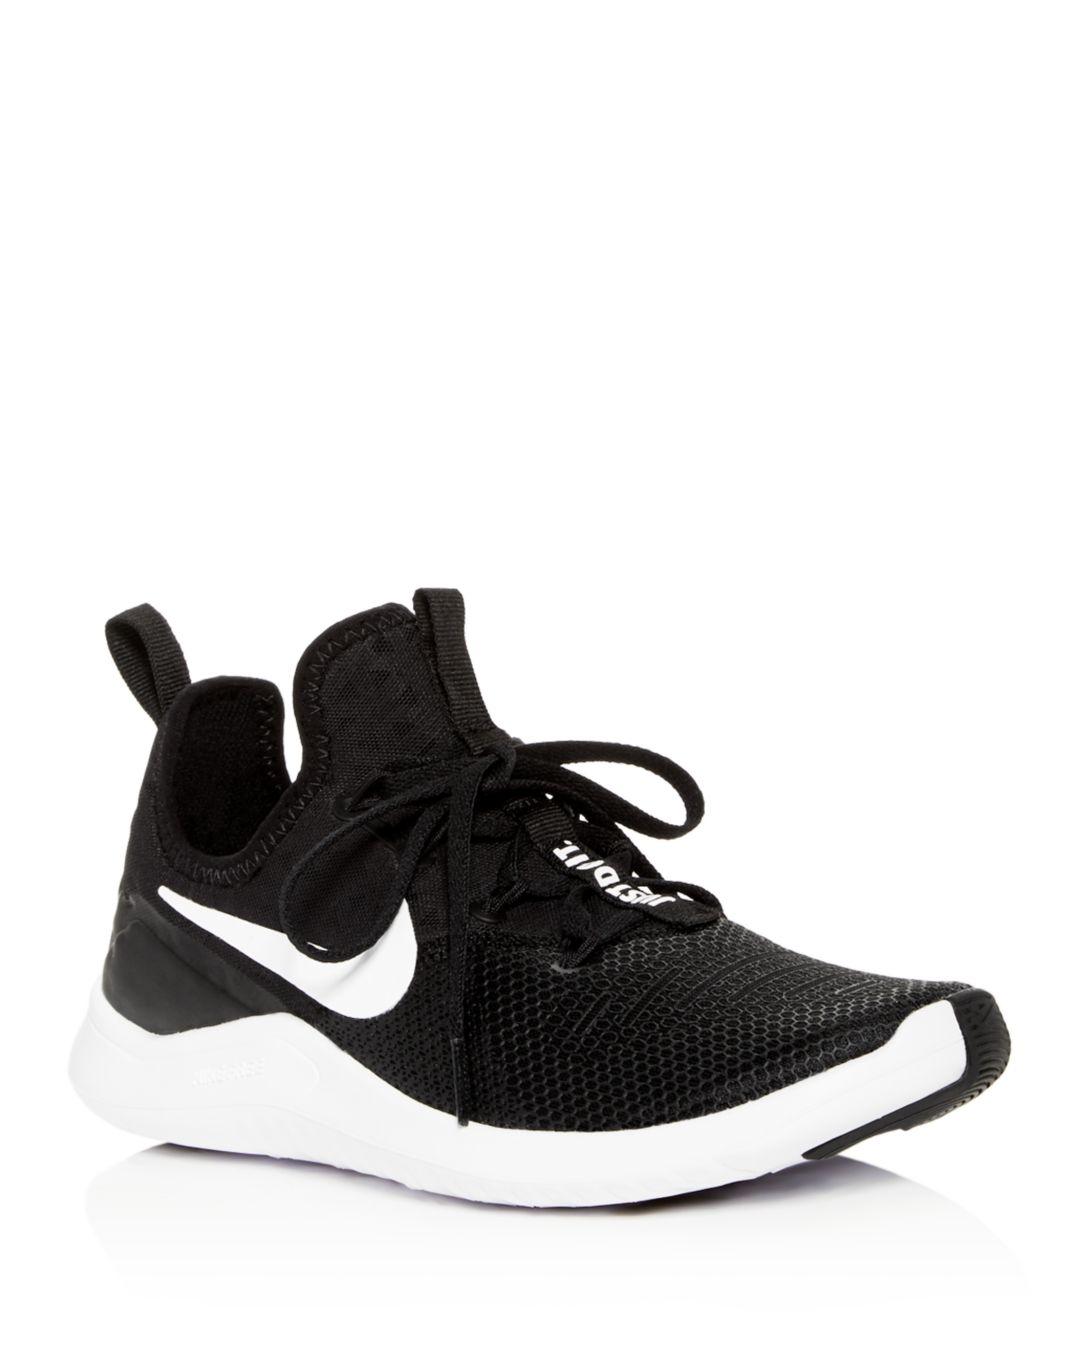 Nike Rubber Free Tr8 Gym/hiit/cross Training Shoe in Black/White (Black) -  Save 44% | Lyst